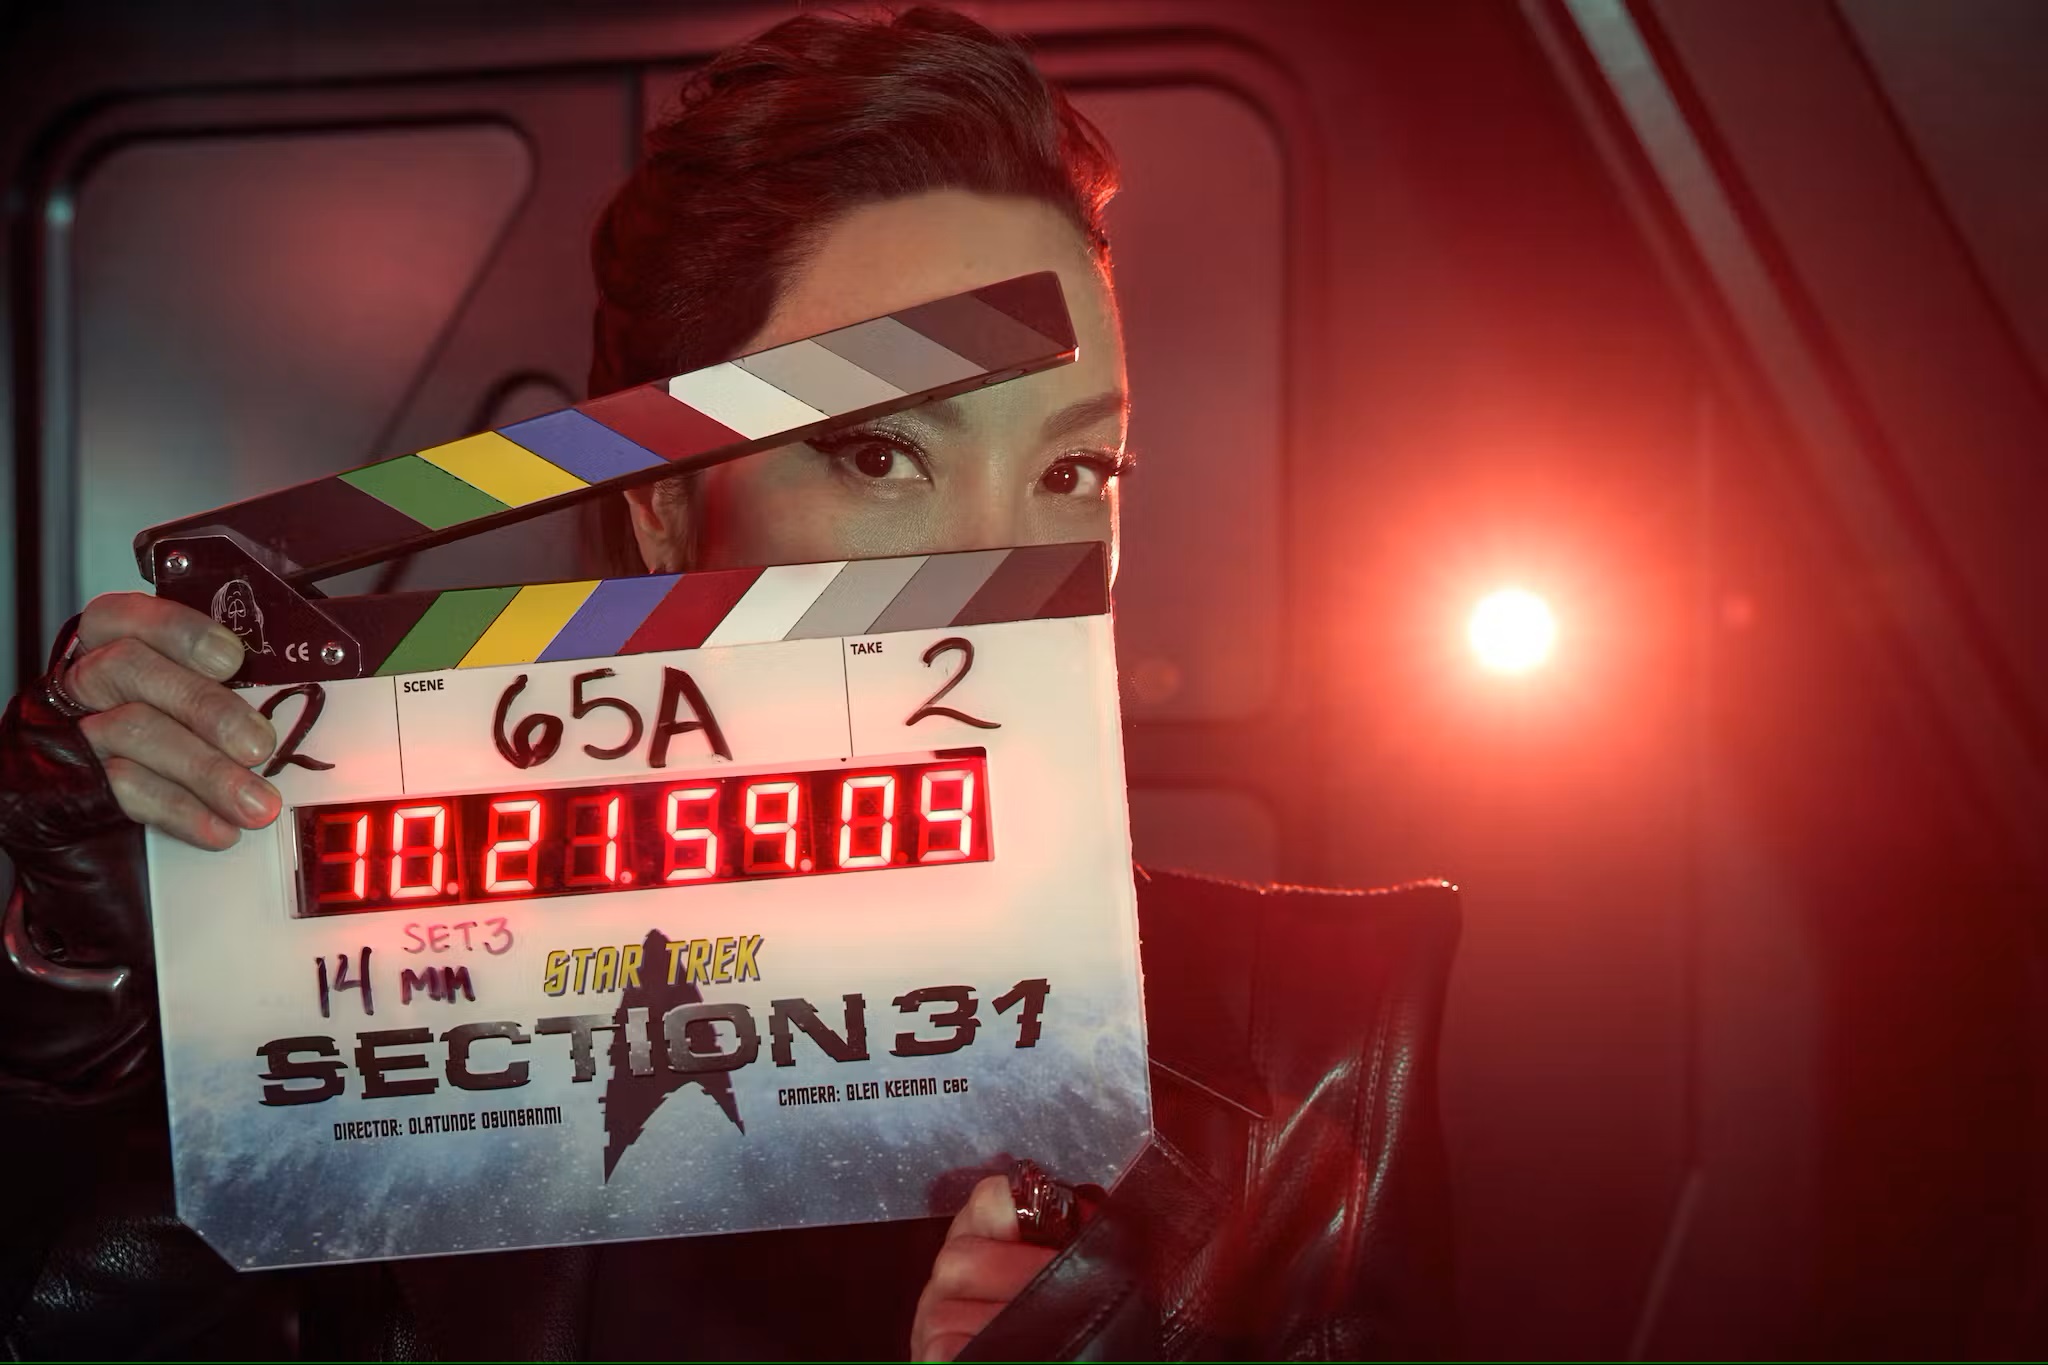 Star Trek: Section 31 - Michelle Yeoh with clapperboard